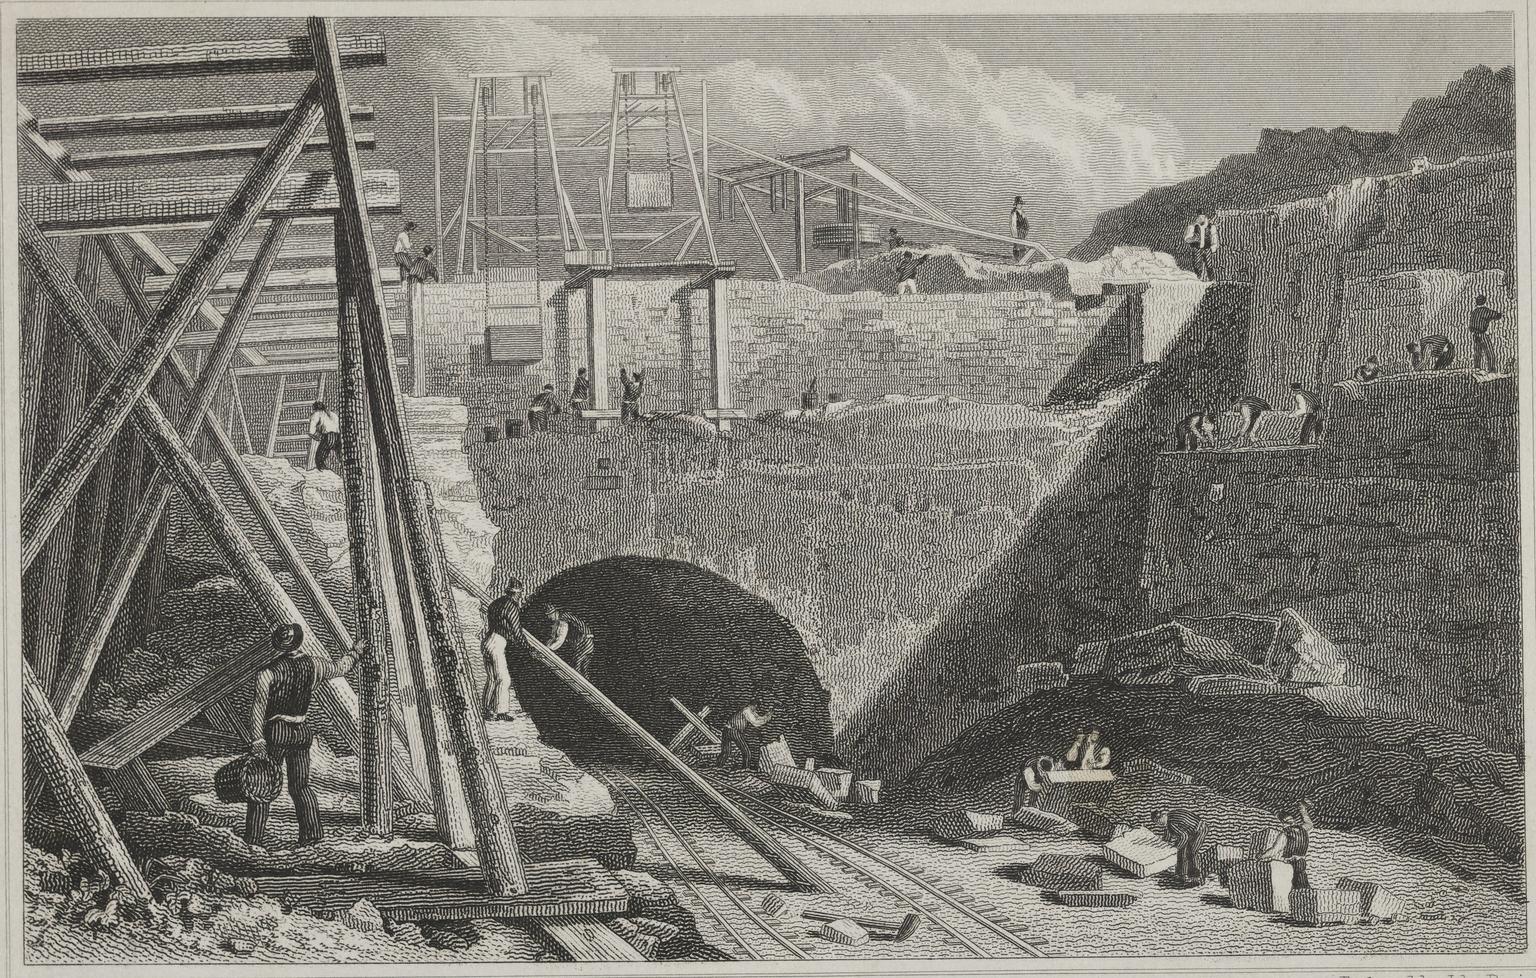 Navvies working at the Entrance to the Tunnel of the Liverpool and Manchester Railway, Edgehill